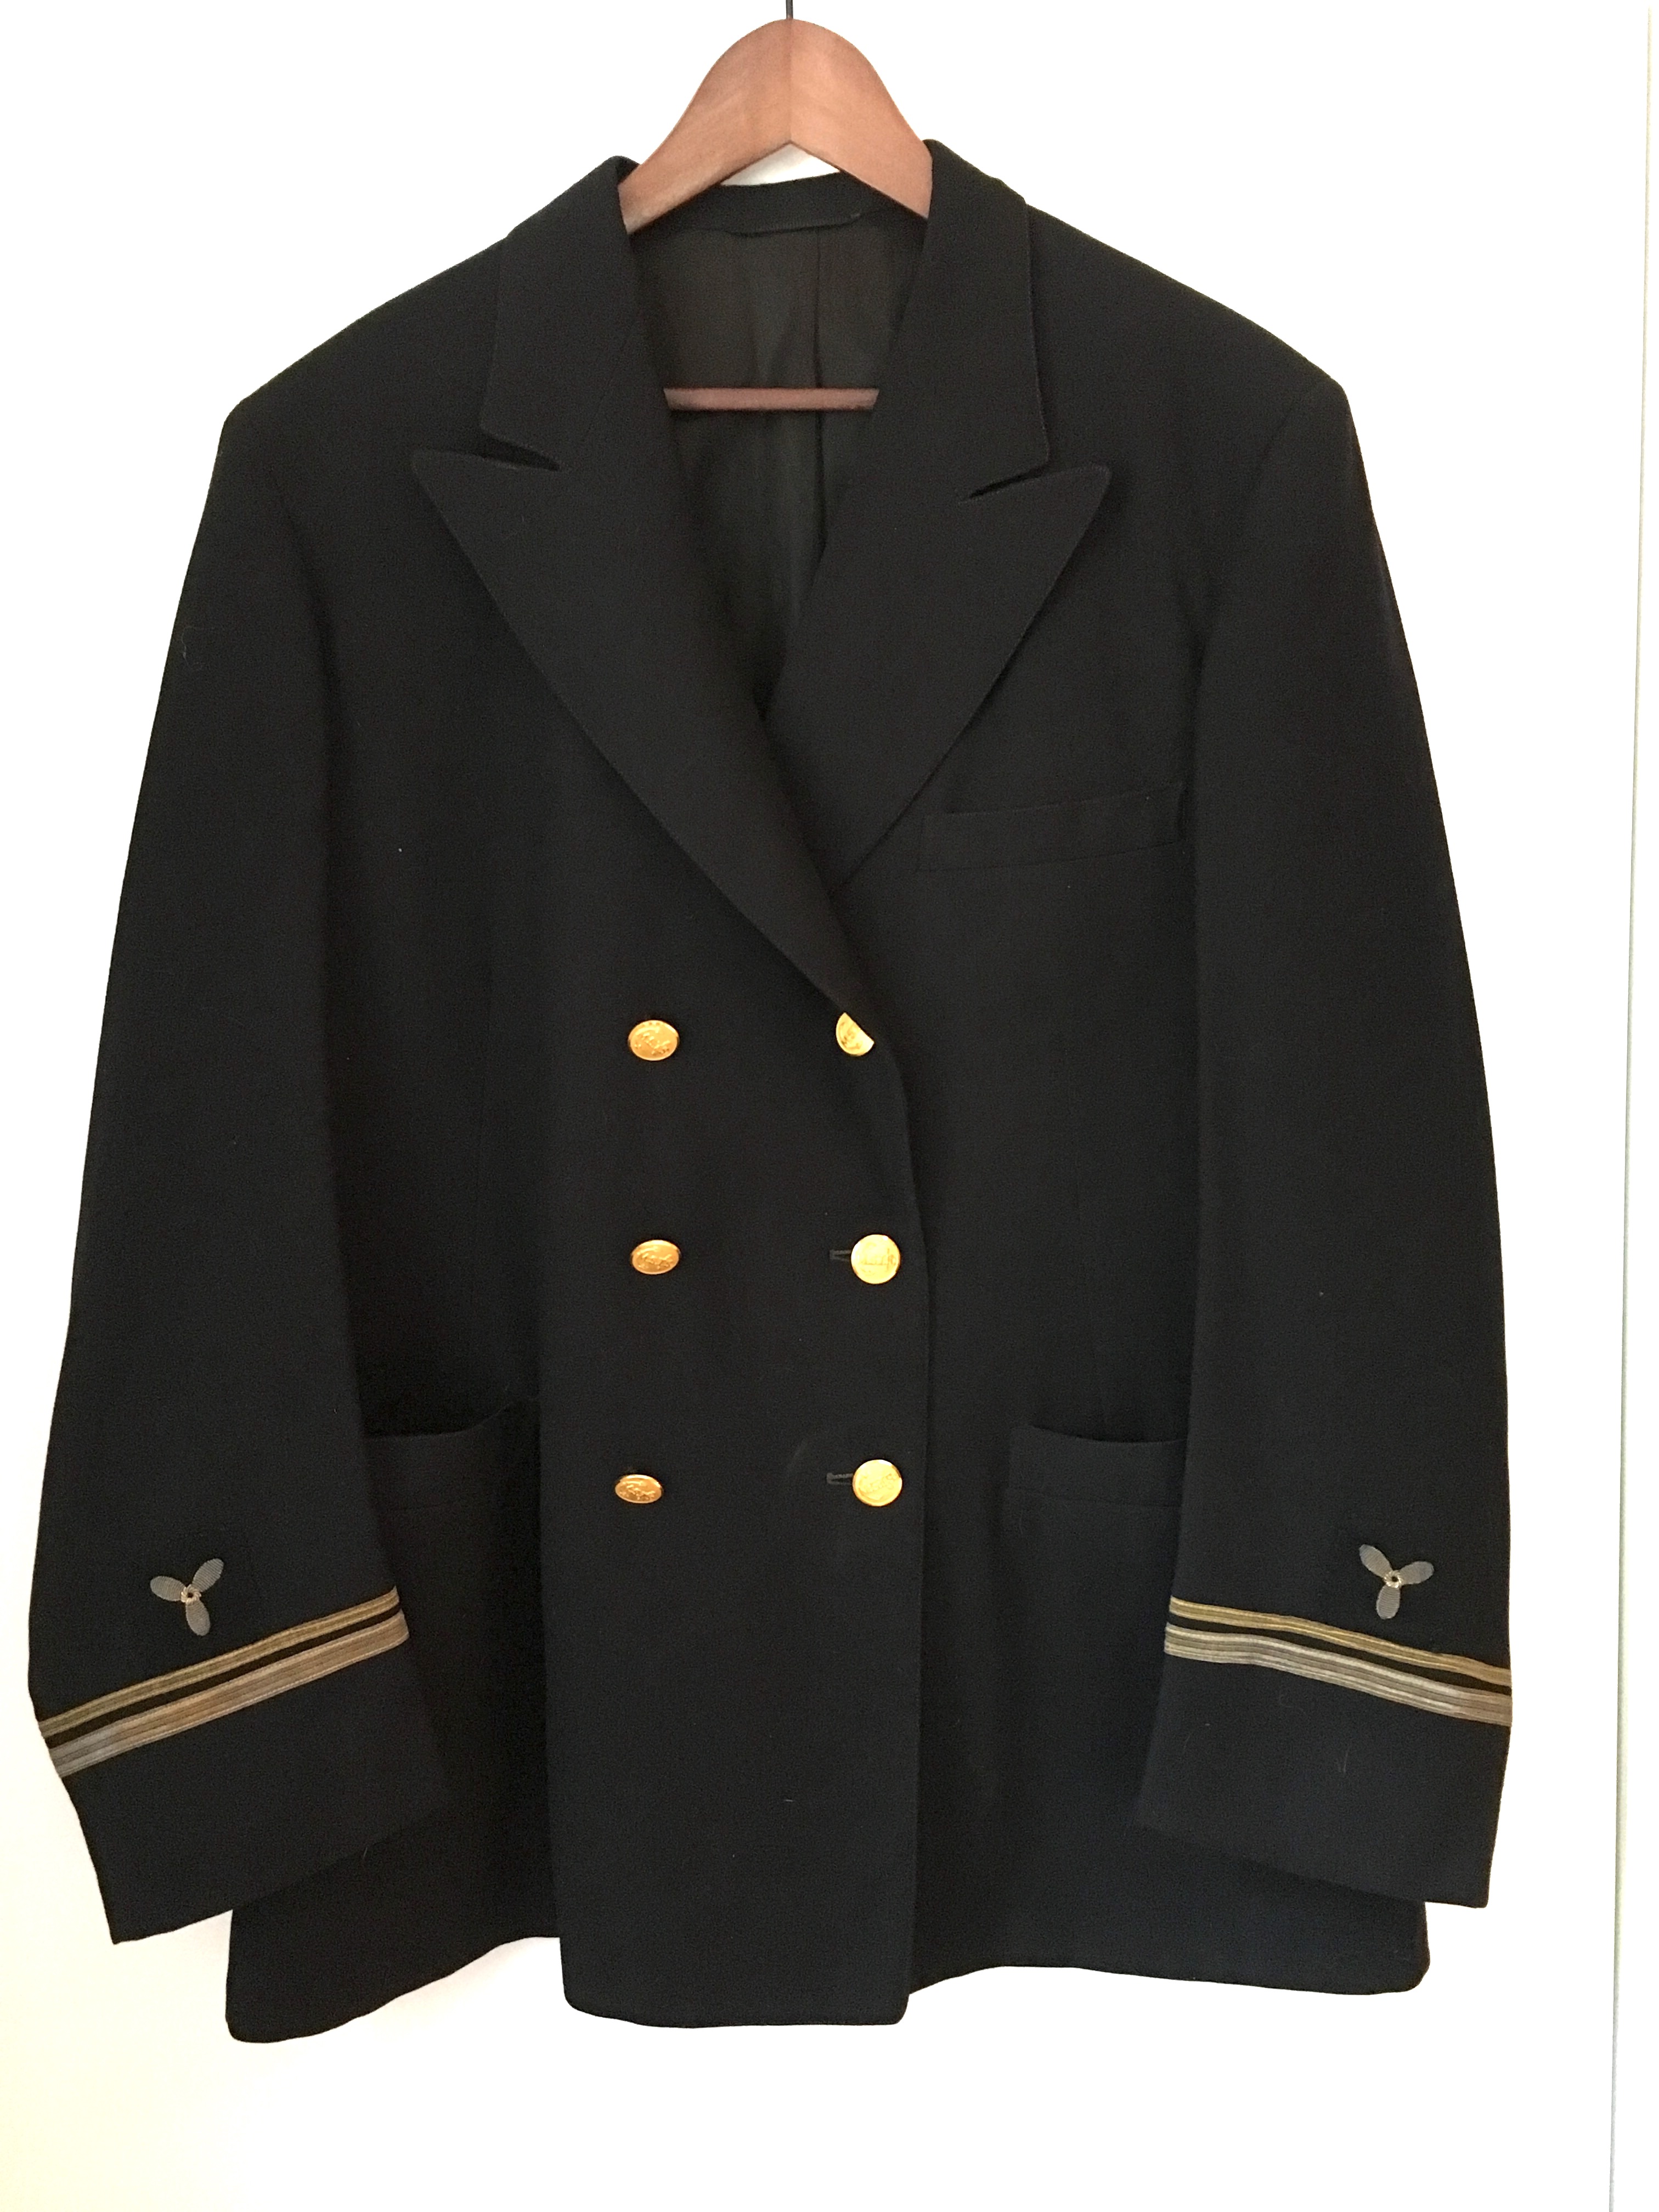 msts uniforms – a collection of writing